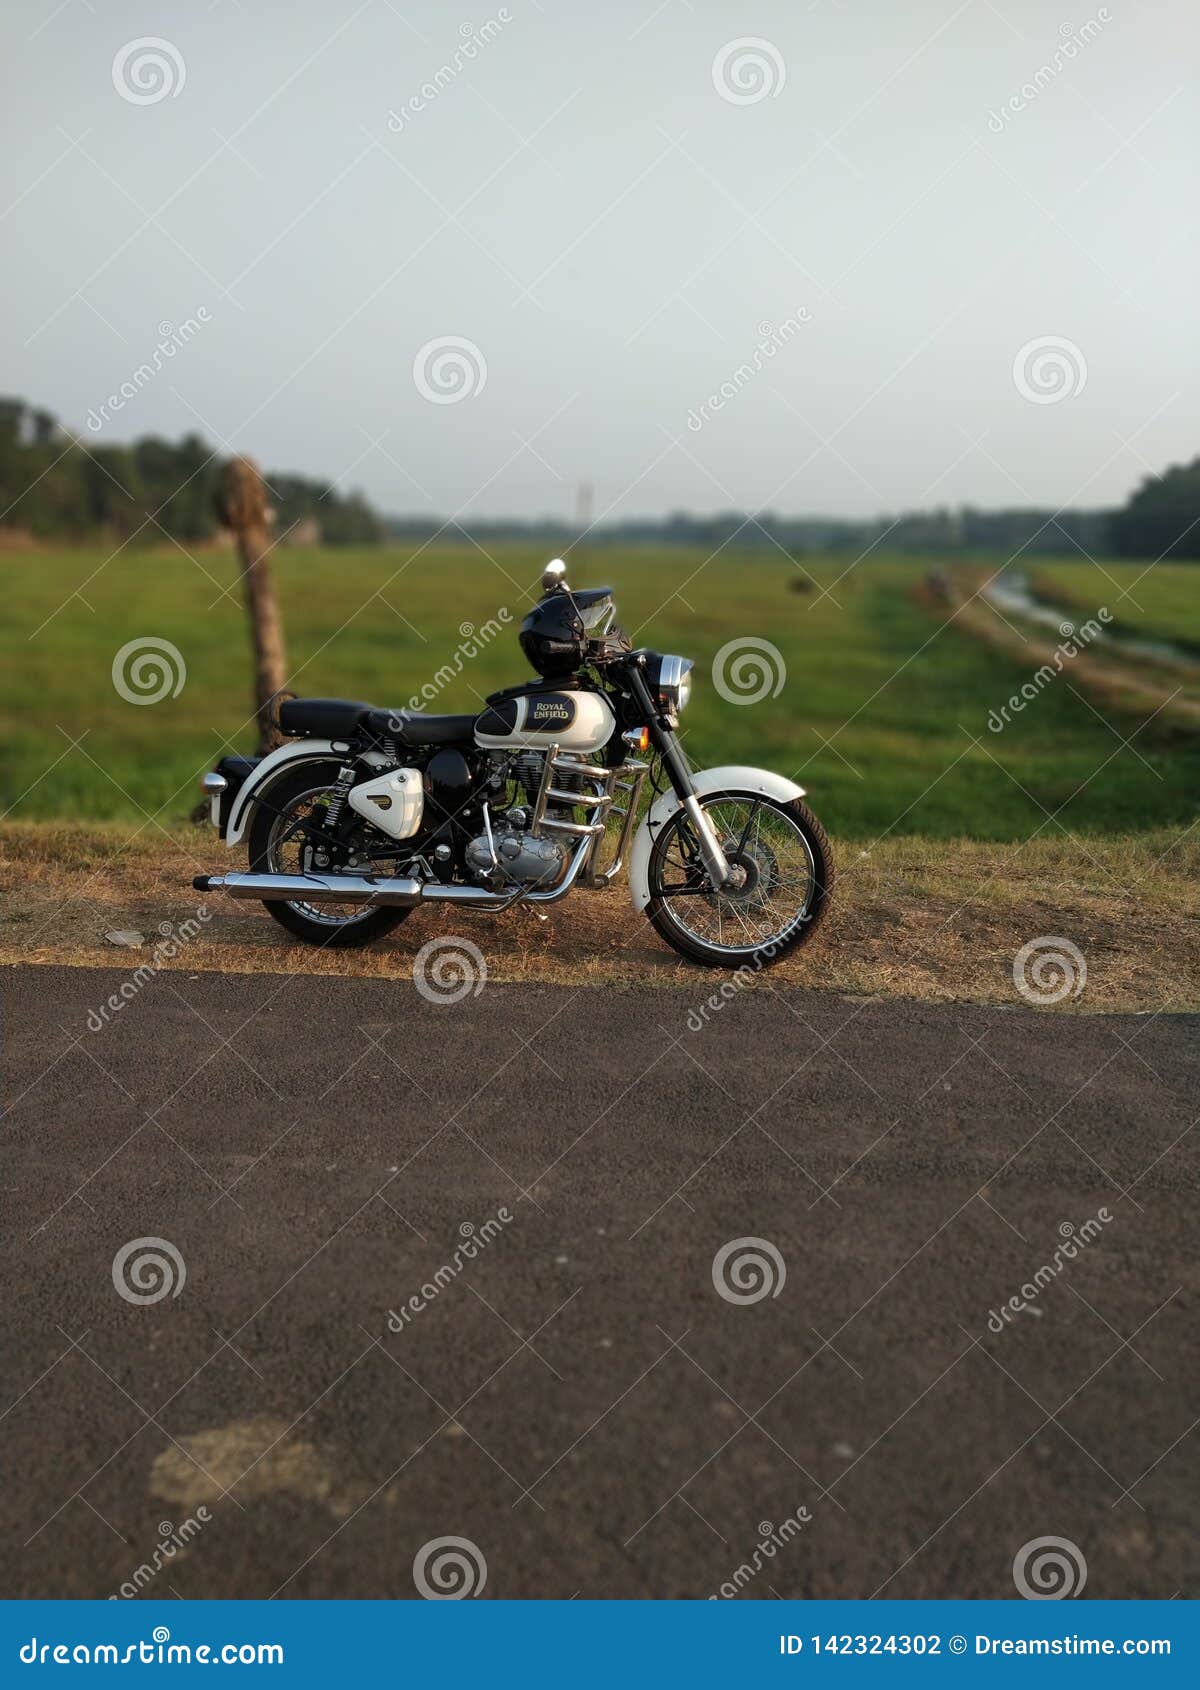 Royal enfield classic editorial photography. Image of classic - 142324302